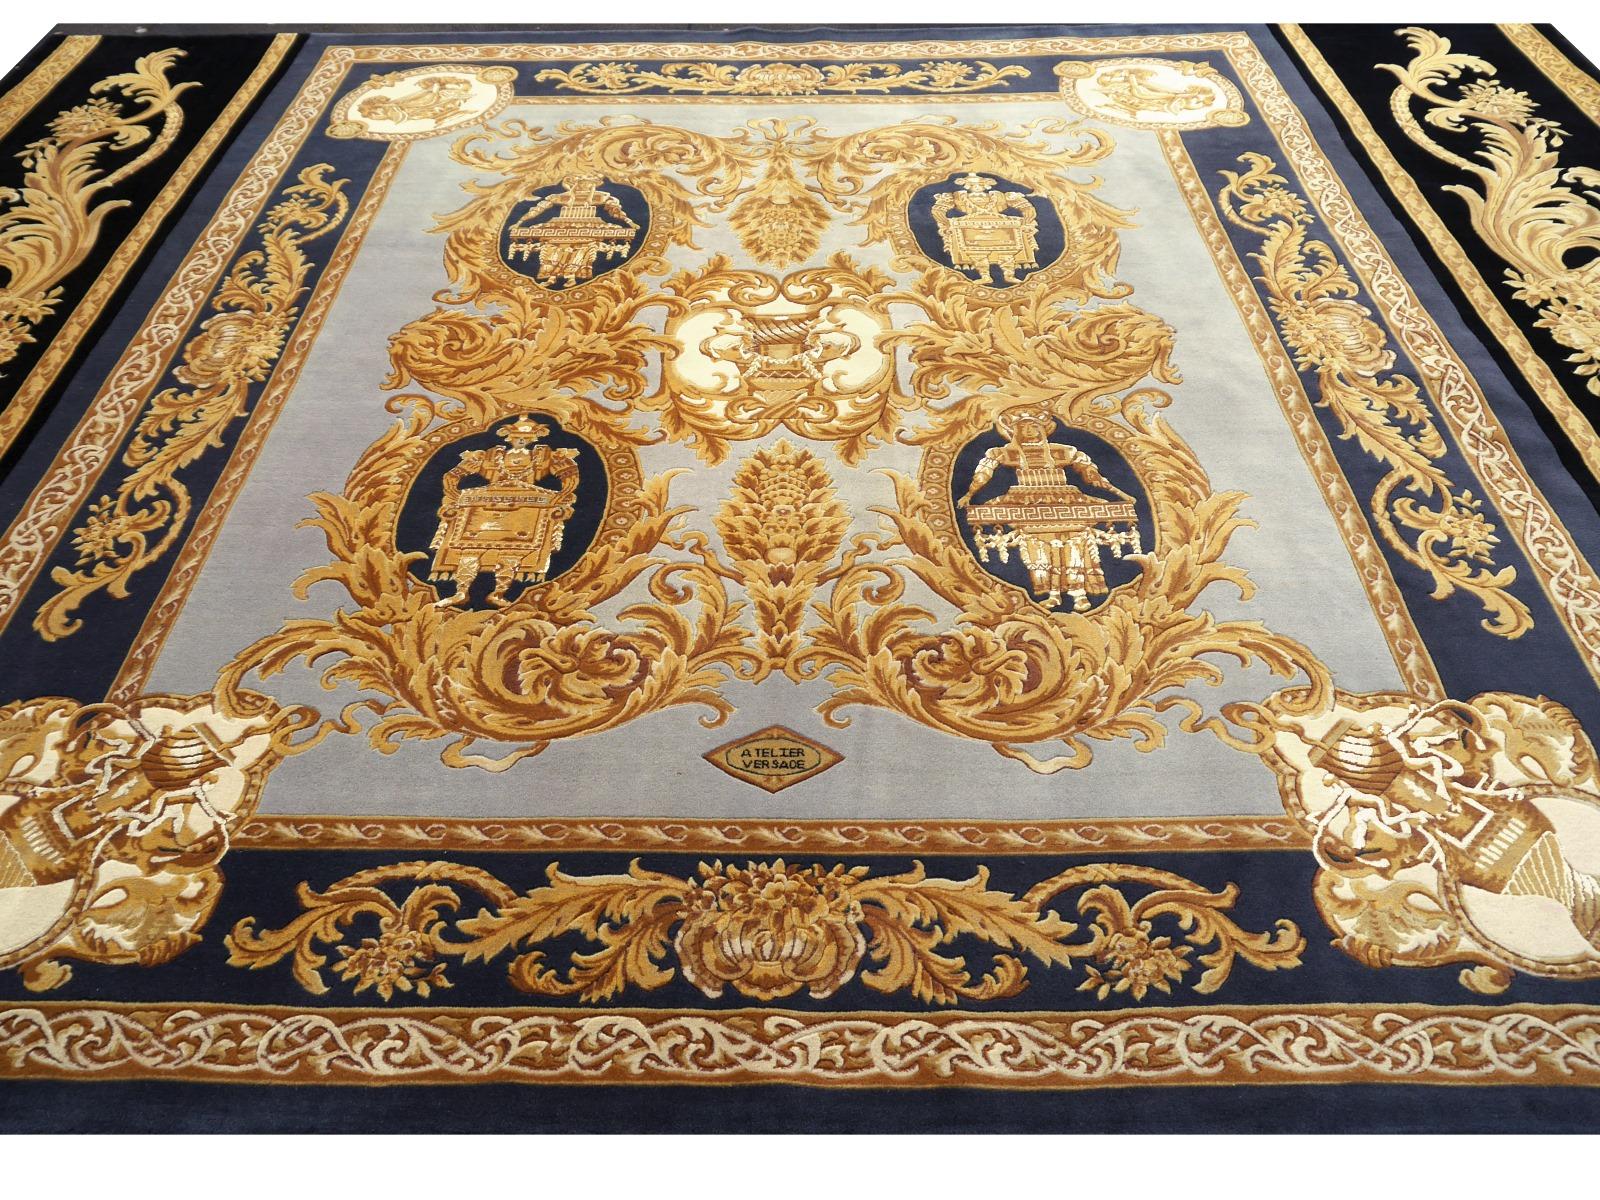 Gianni Versace rug Home Signature Collection black gray gold 

A beautiful and rare large size Gianni Versace carpet.

Hand knotted in China, pile is wool and silk combination.

This rug stands out of most offered Versace rugs on the market,